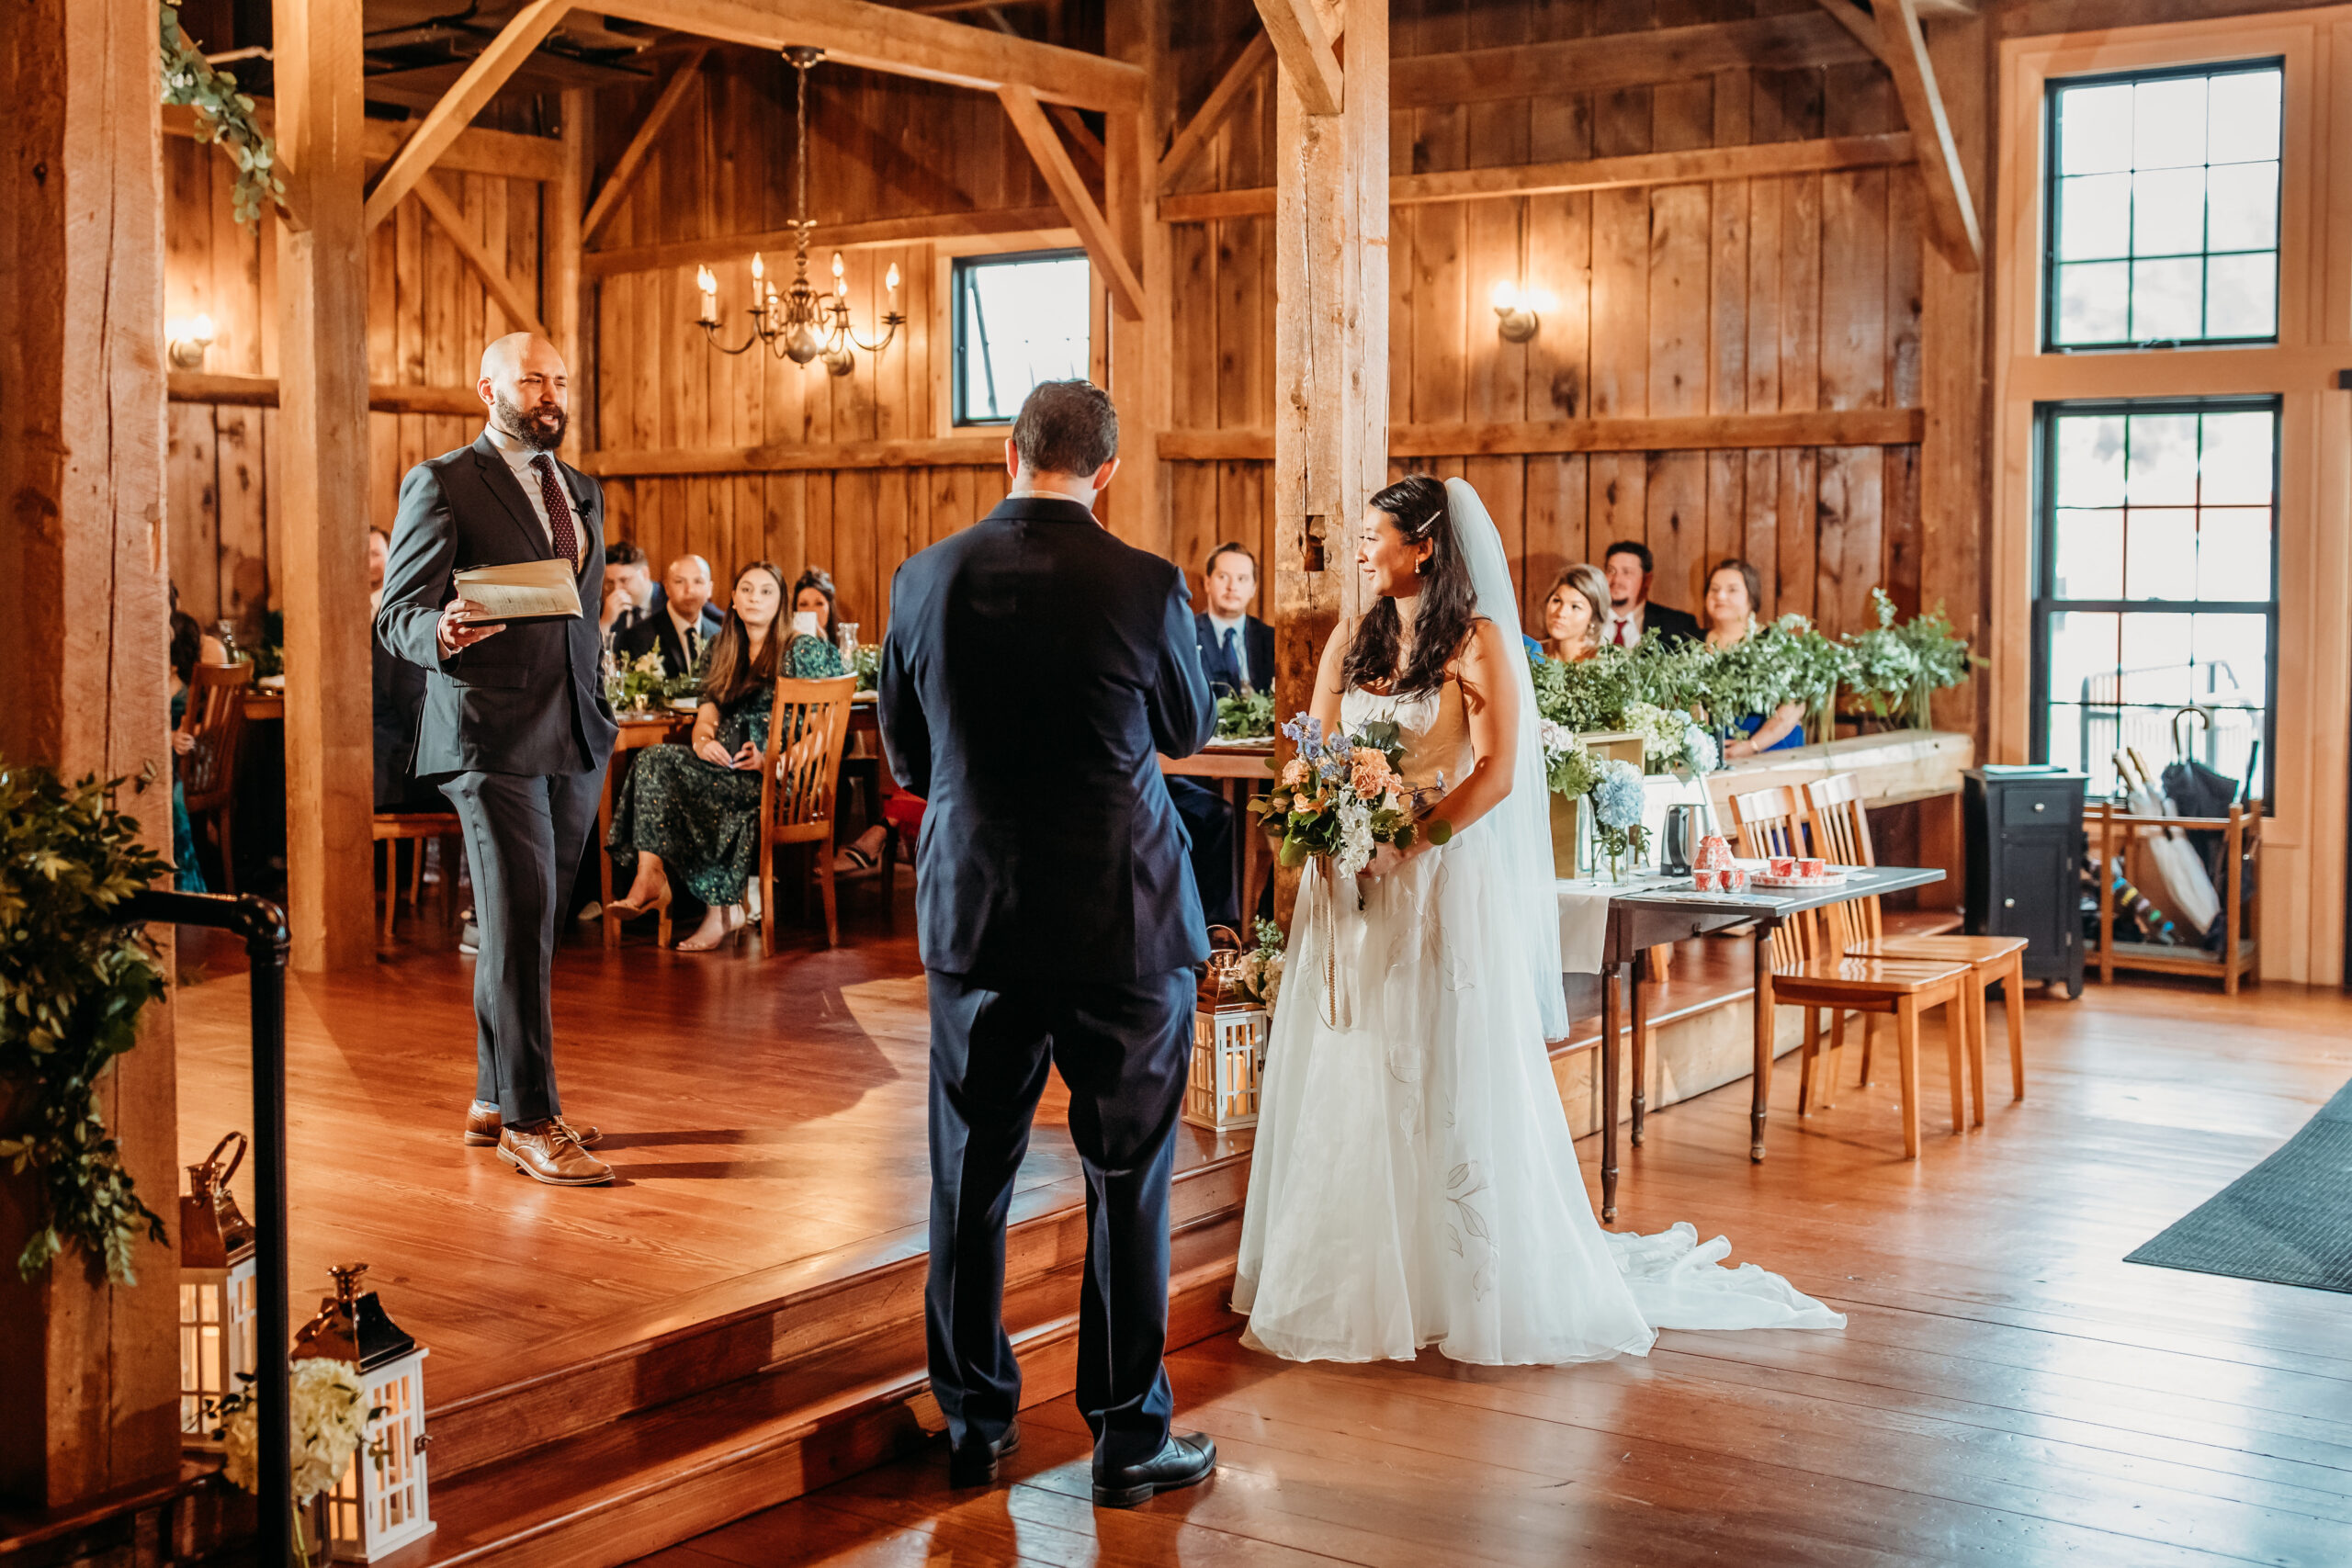 A bride and groom being married by a man while guests watch inside The Barn at Boyden Farm's rustic barn venue